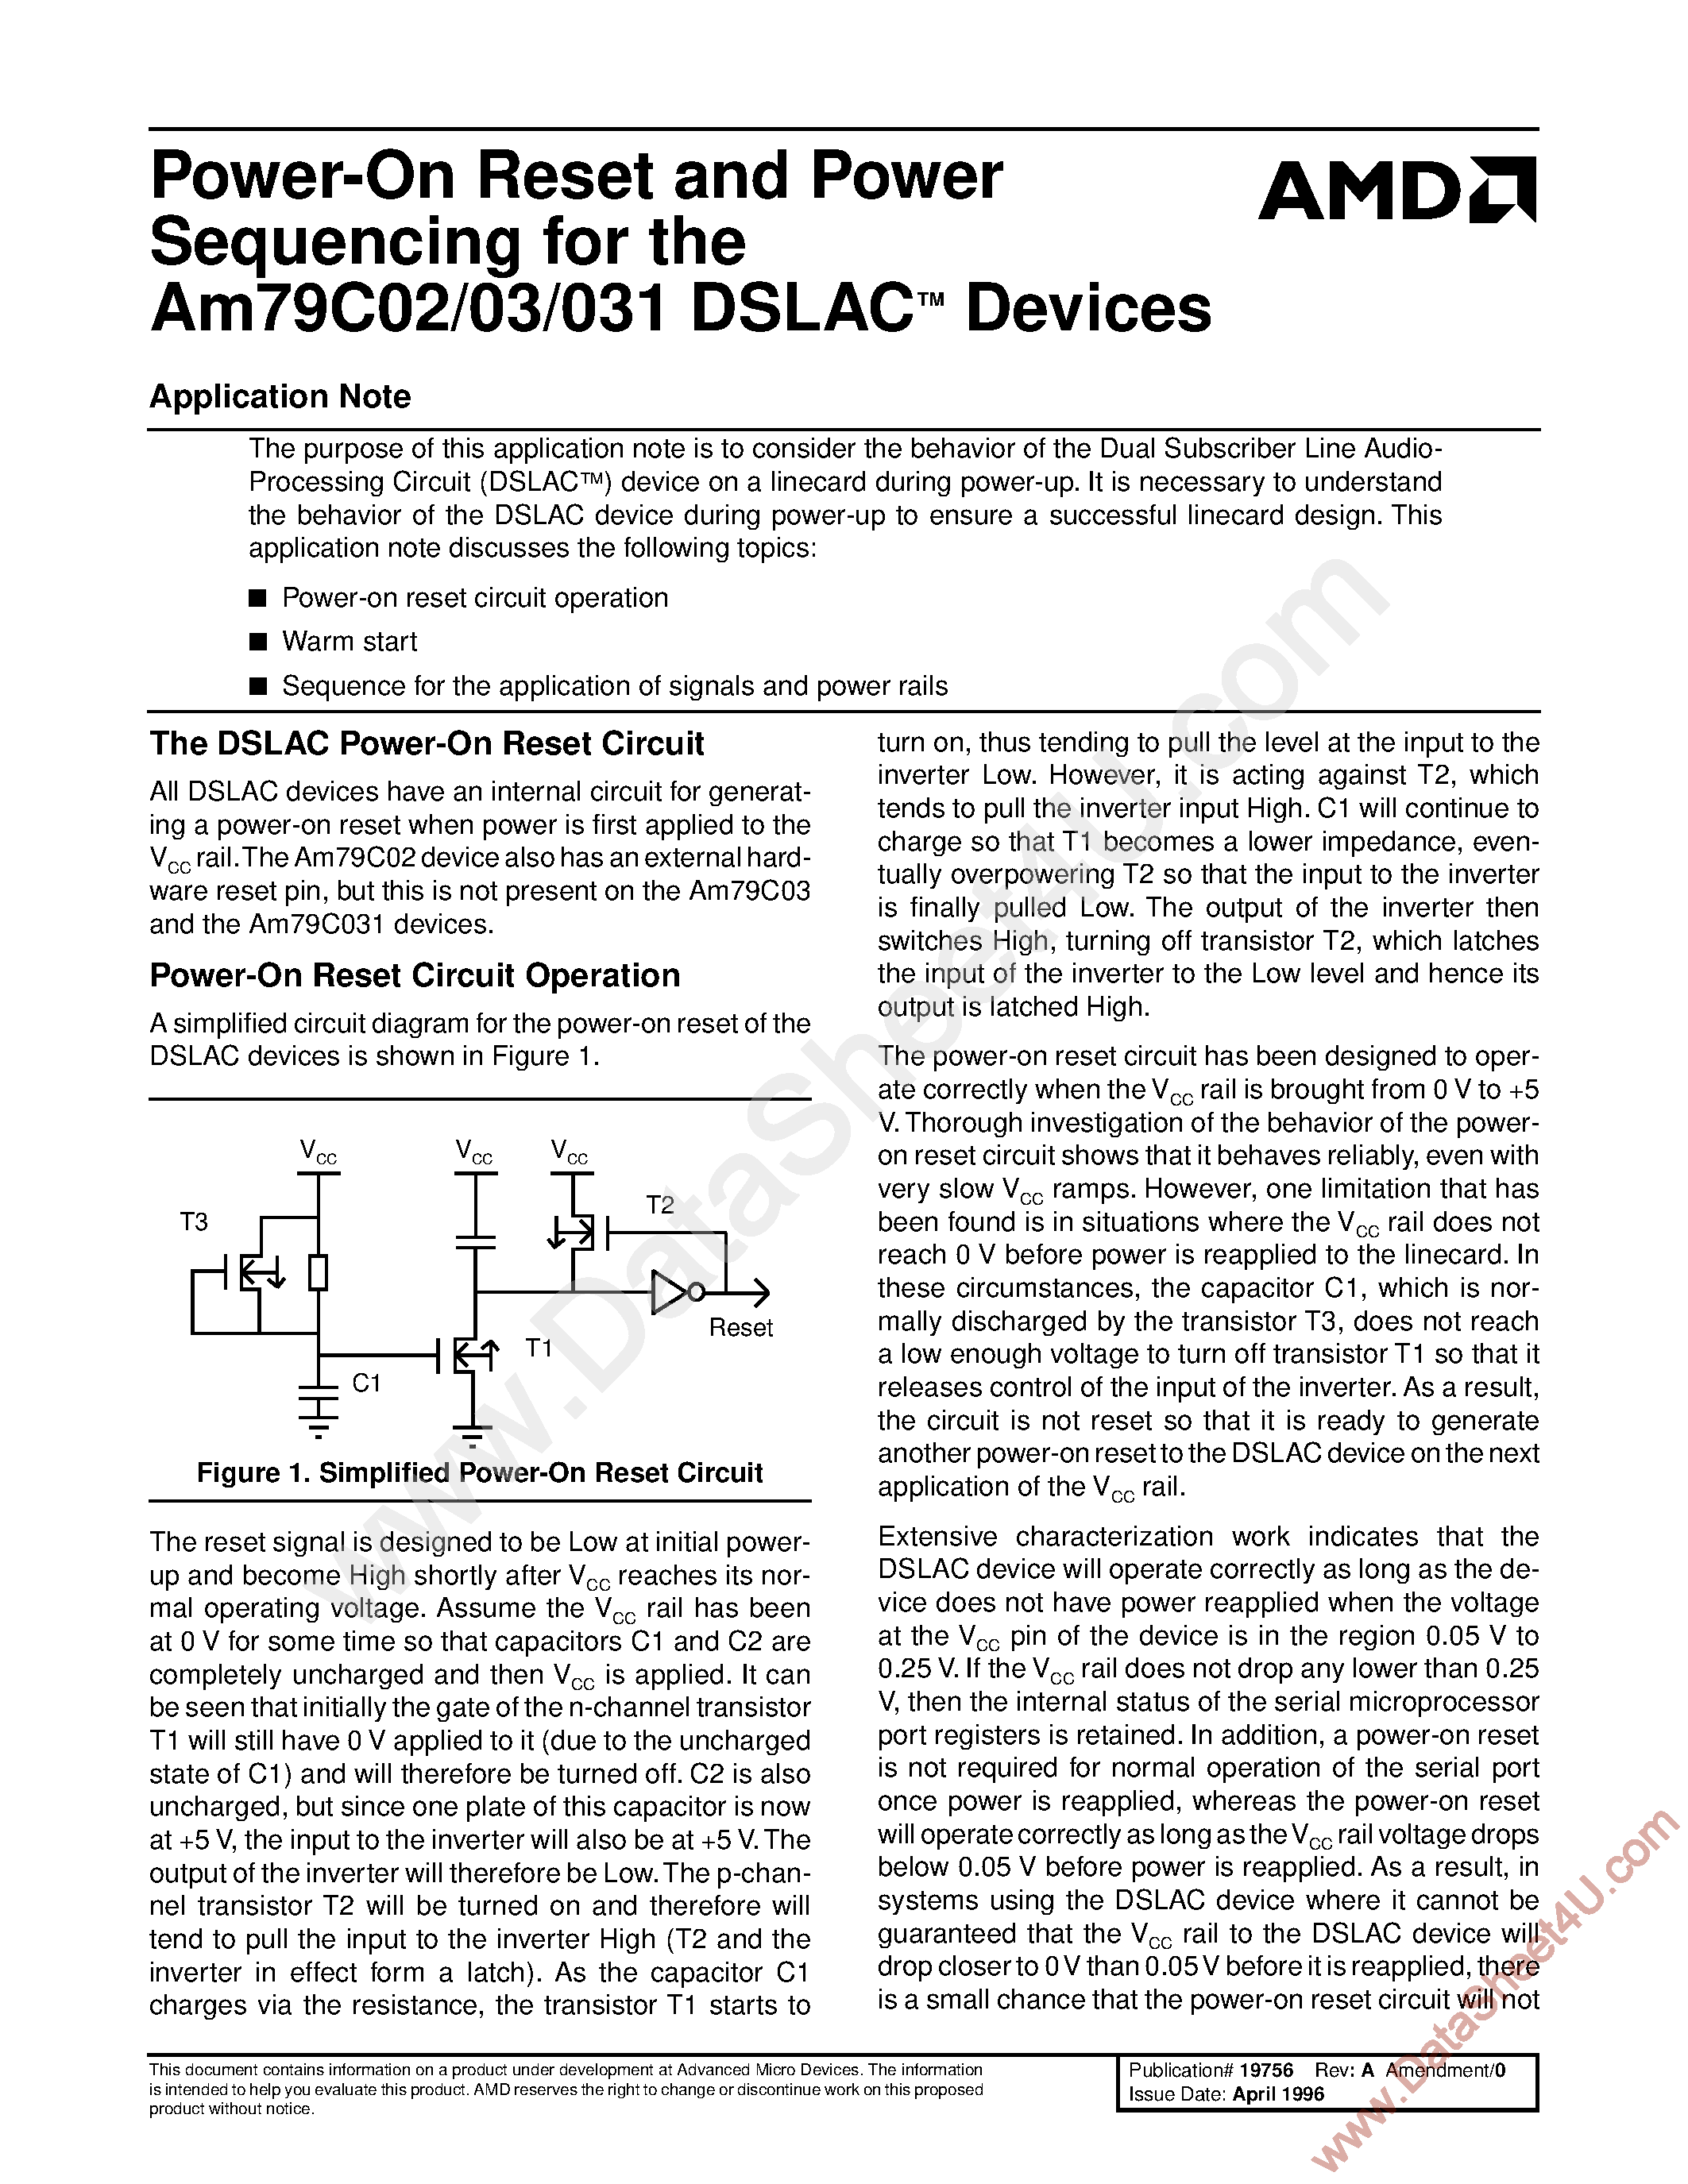 Datasheet AM79C02 - (AM79C02/03/031) Power-On Reset and Power Sequencing page 1